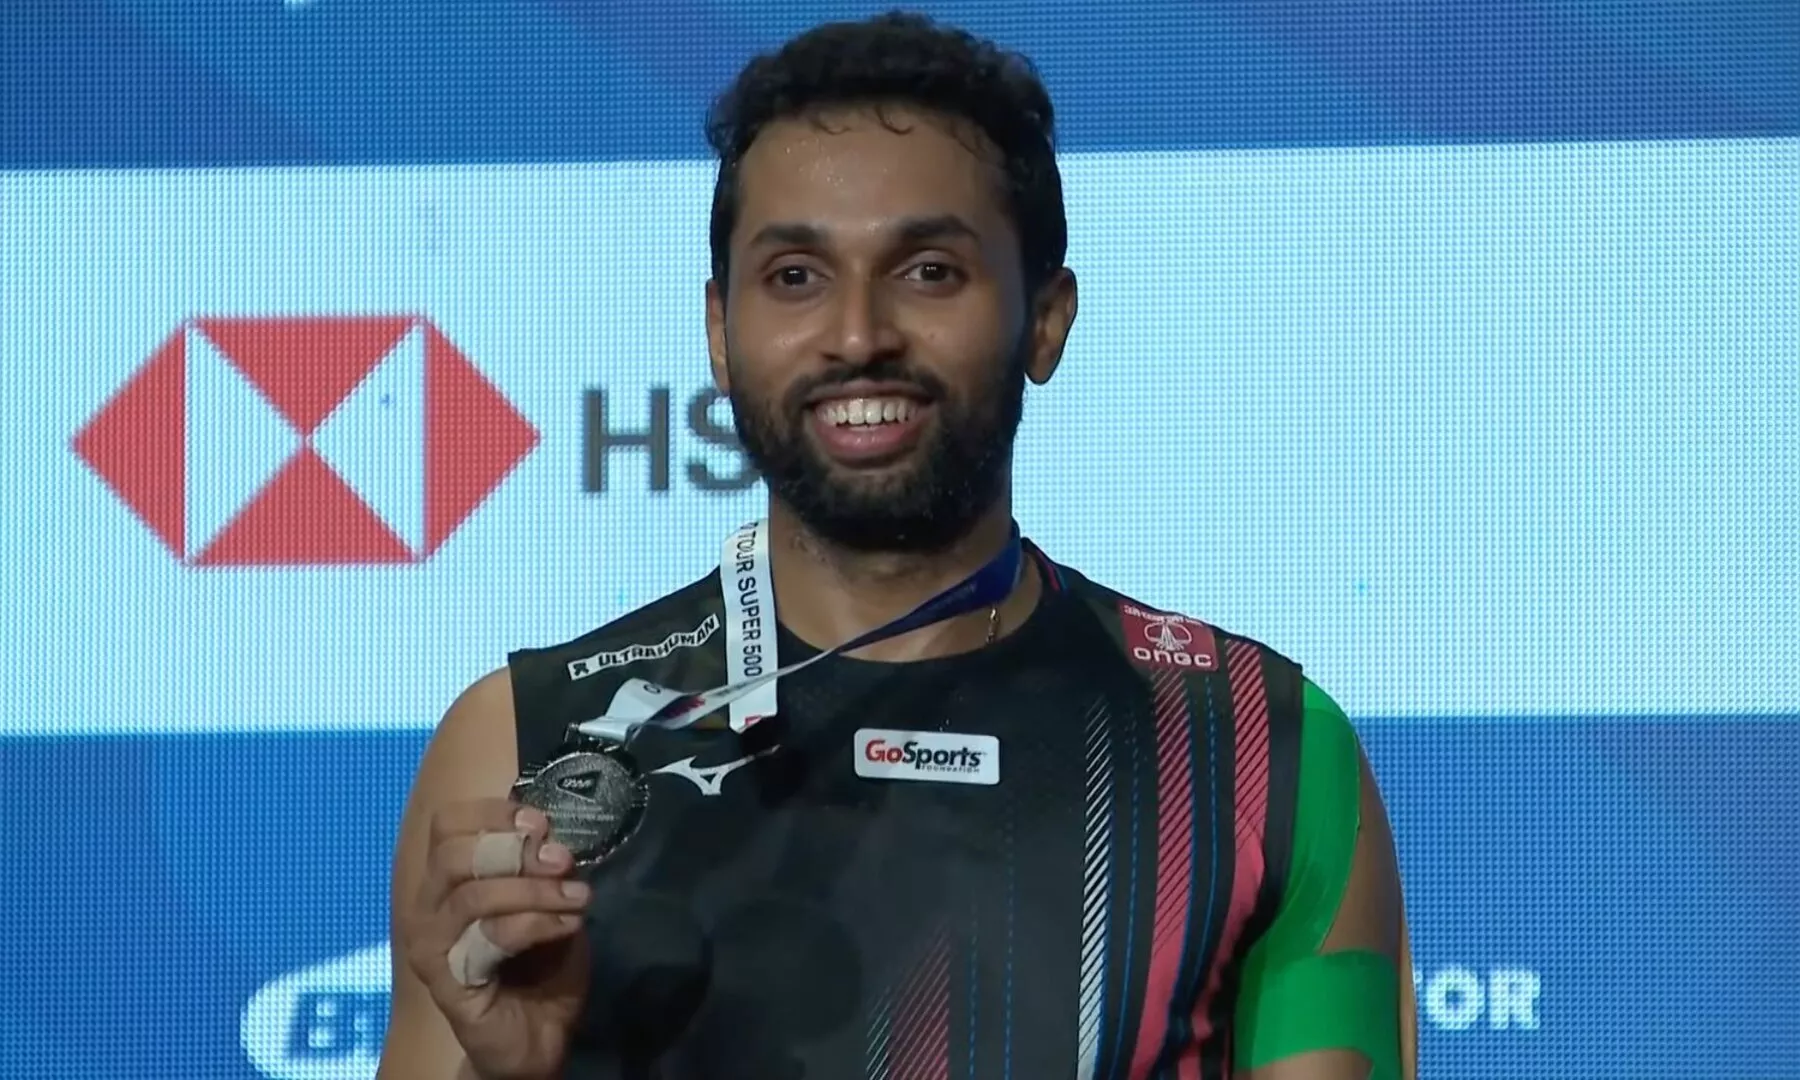 Prannoy squanders 19-14 lead in decider as China's Weng Hong Yang clinches  Australian Open Super 500 badminton title